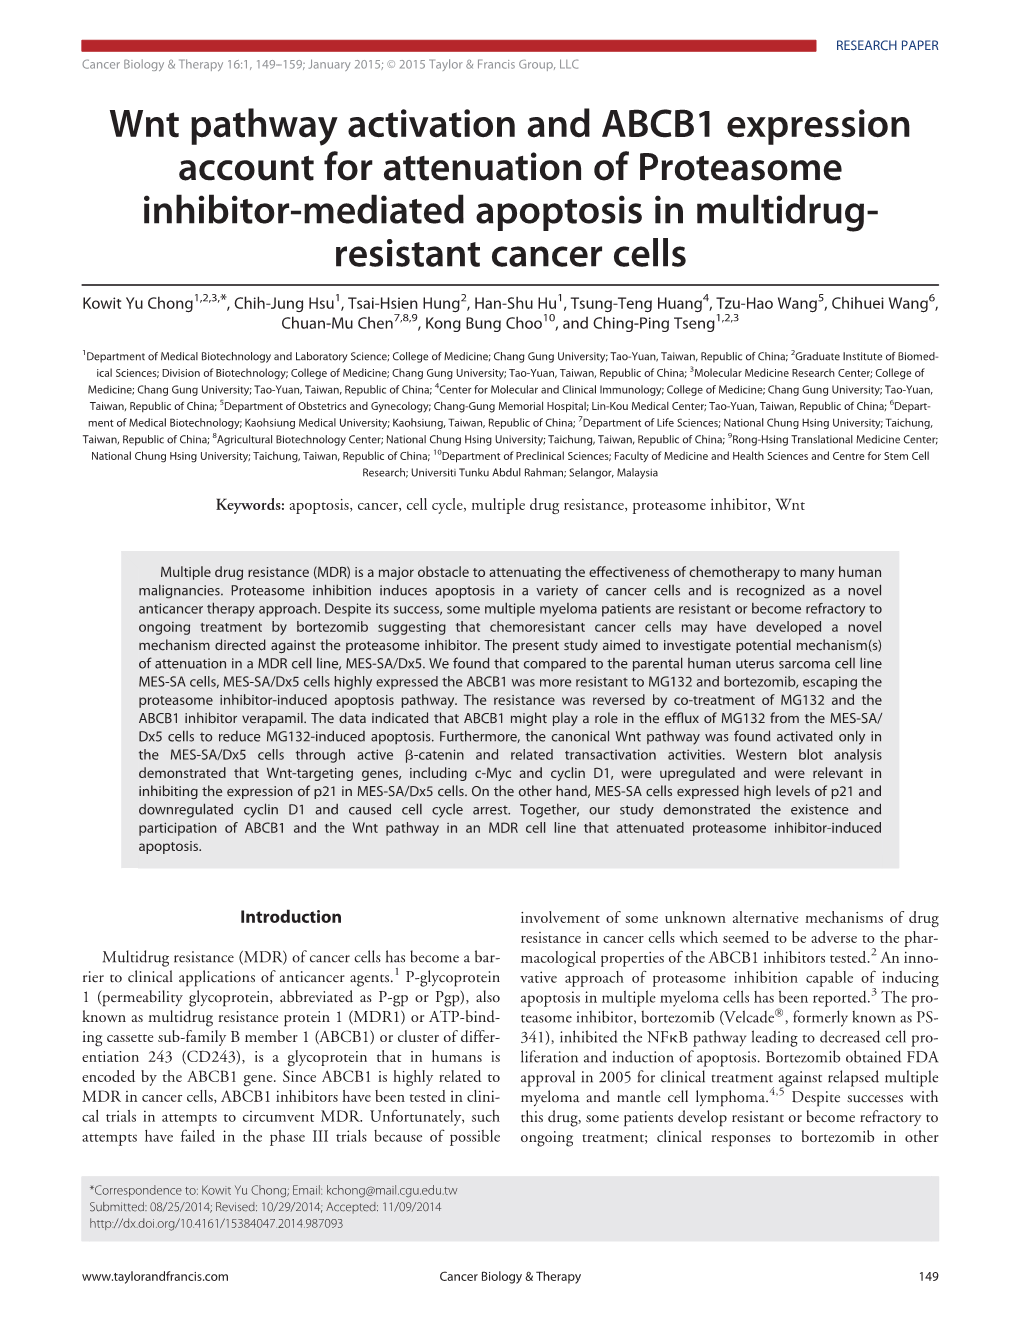 Wnt Pathway Activation and ABCB1 Expression Account for Attenuation of Proteasome Inhibitor-Mediated Apoptosis in Multidrug- Resistant Cancer Cells